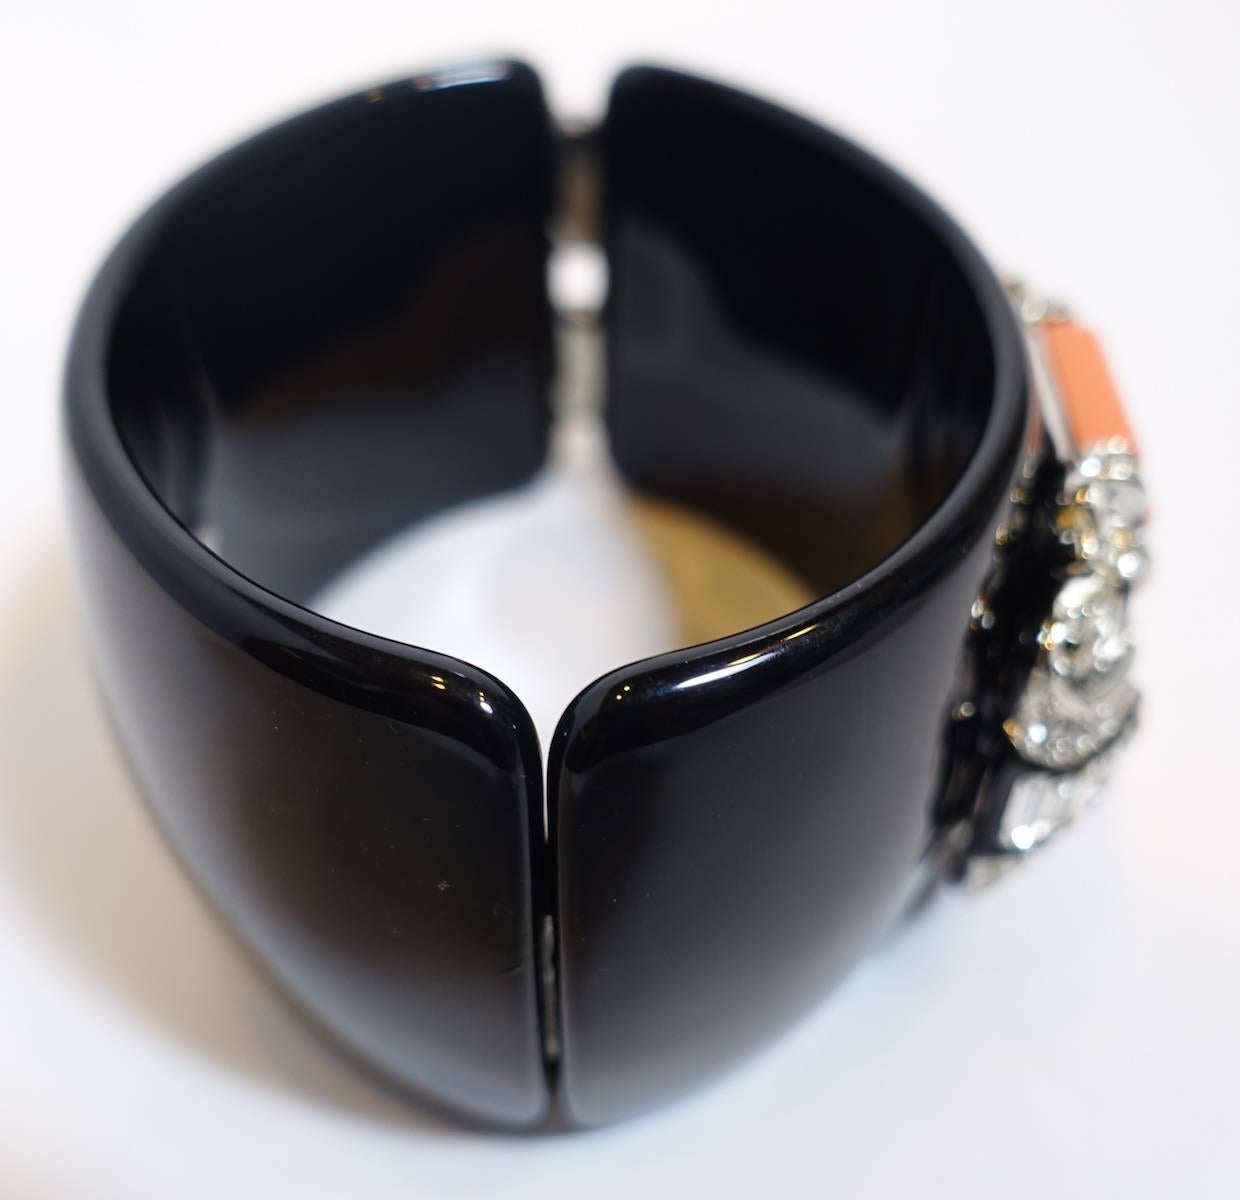 This signed Kenneth Jay Lane deco style clamper bracelet features faux coral rods with crystal accents on a black enameled setting.  This clamper bracelet has spring-closure and it measures 6-3/4” x 1-3/4”.  It is signed “Kenneth Lane” and is in